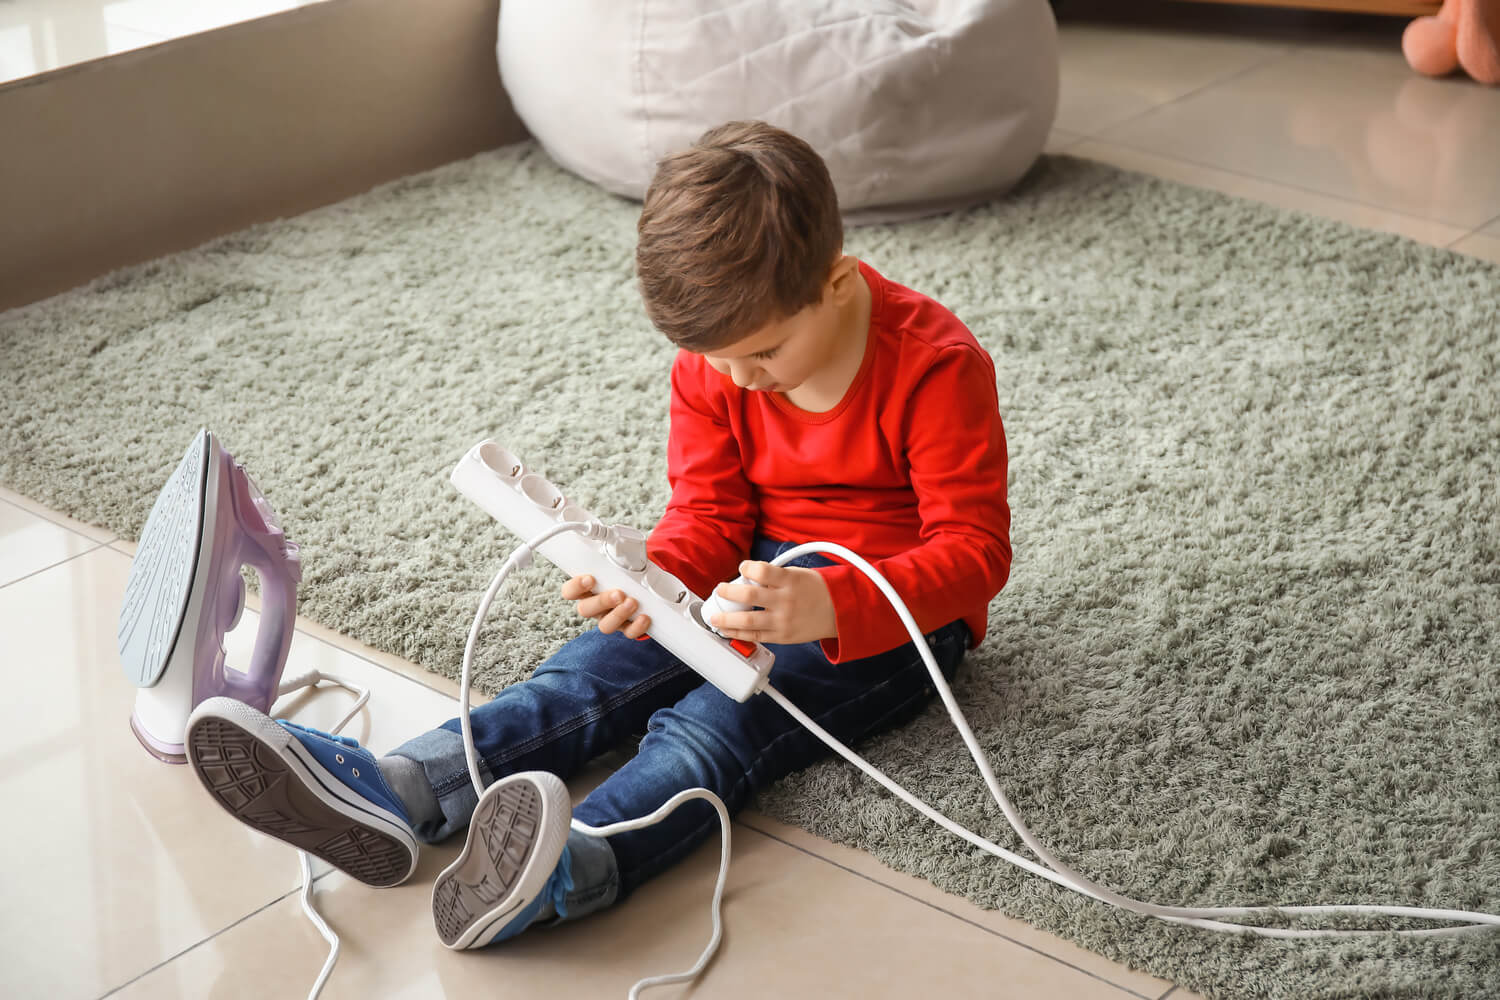 Electricity Safety Tips For Kids